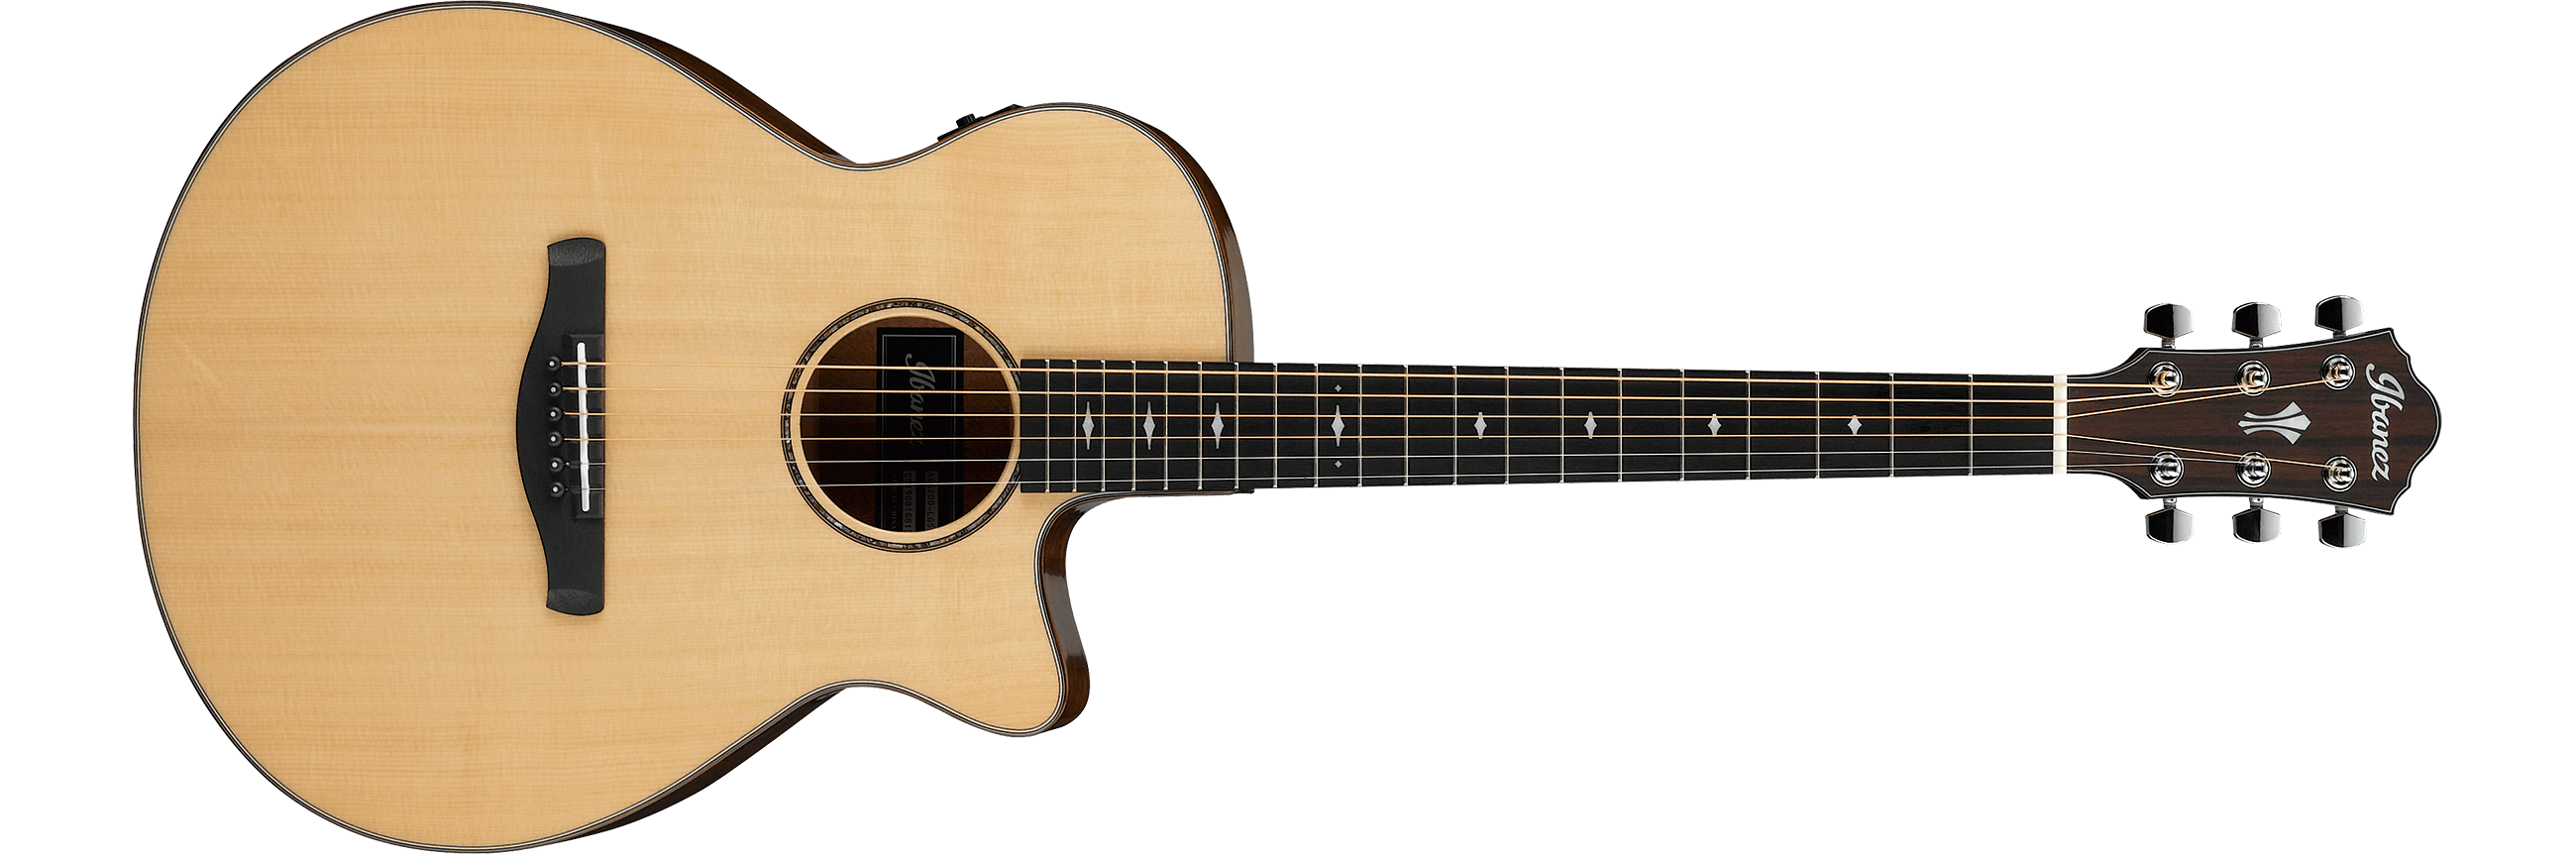 Ibanez AEG200 Acoustic/Electric Guitar - Natural Low Gloss | Jack's On Queen